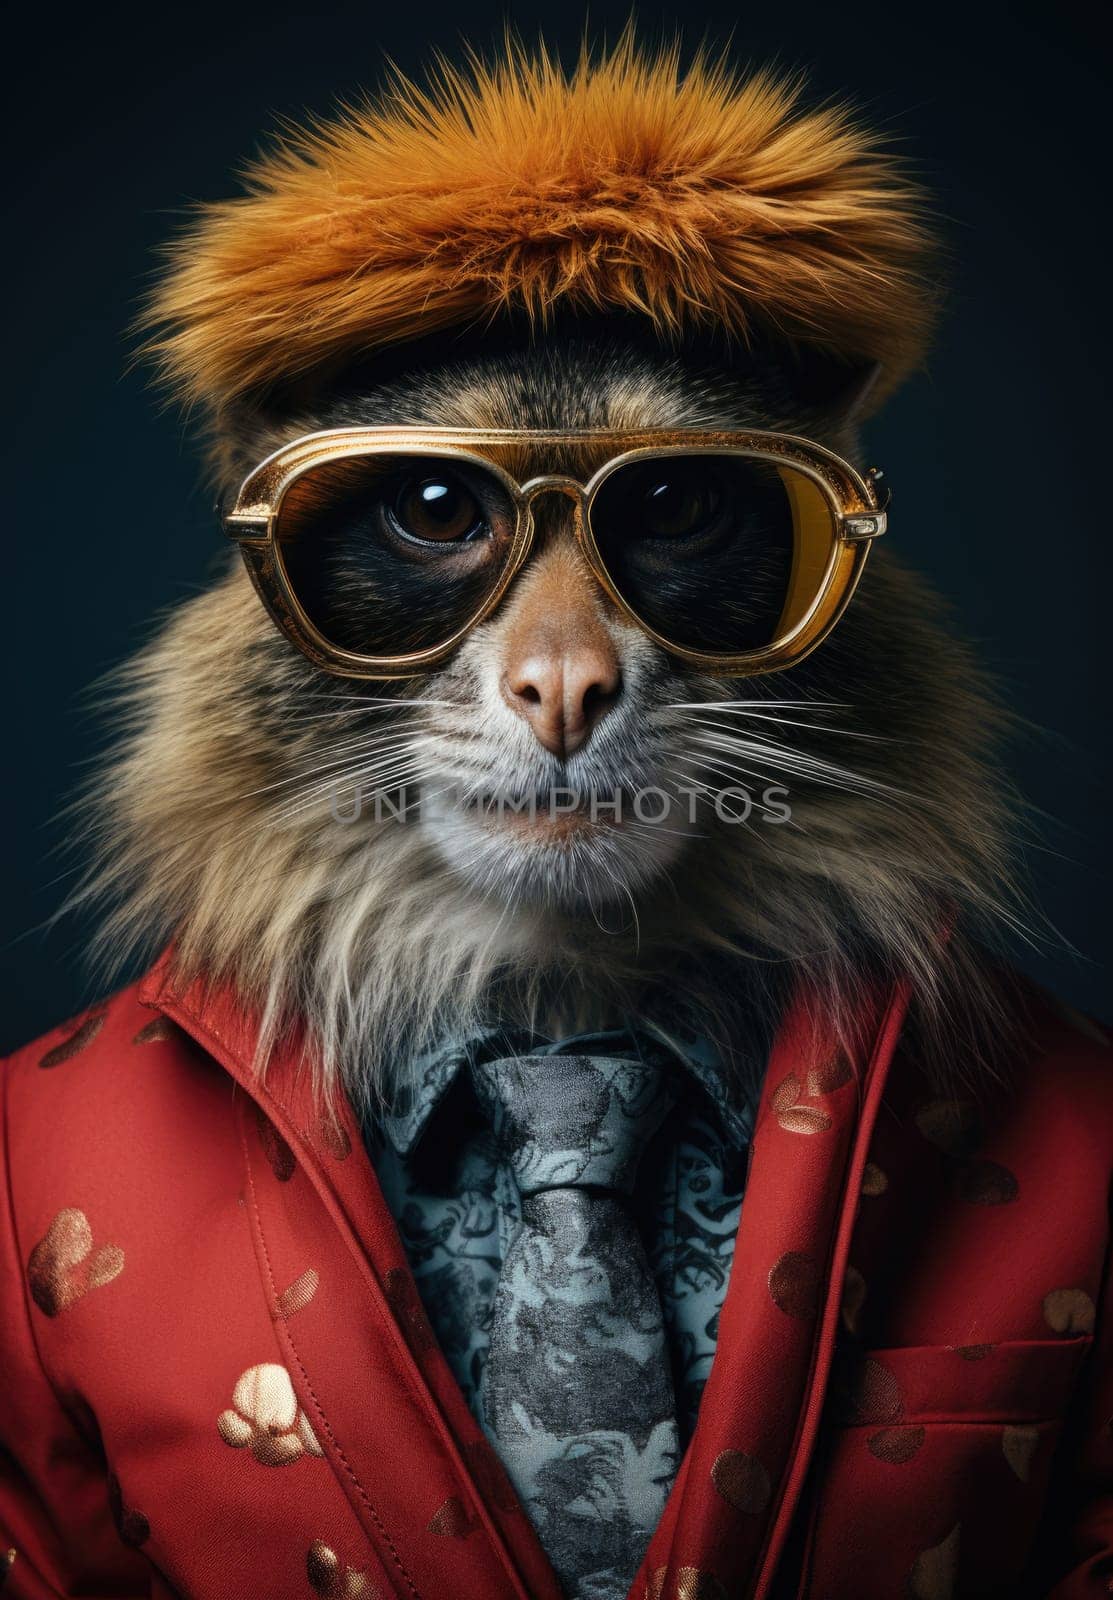 A raccoon wearing a suit and sunglasses